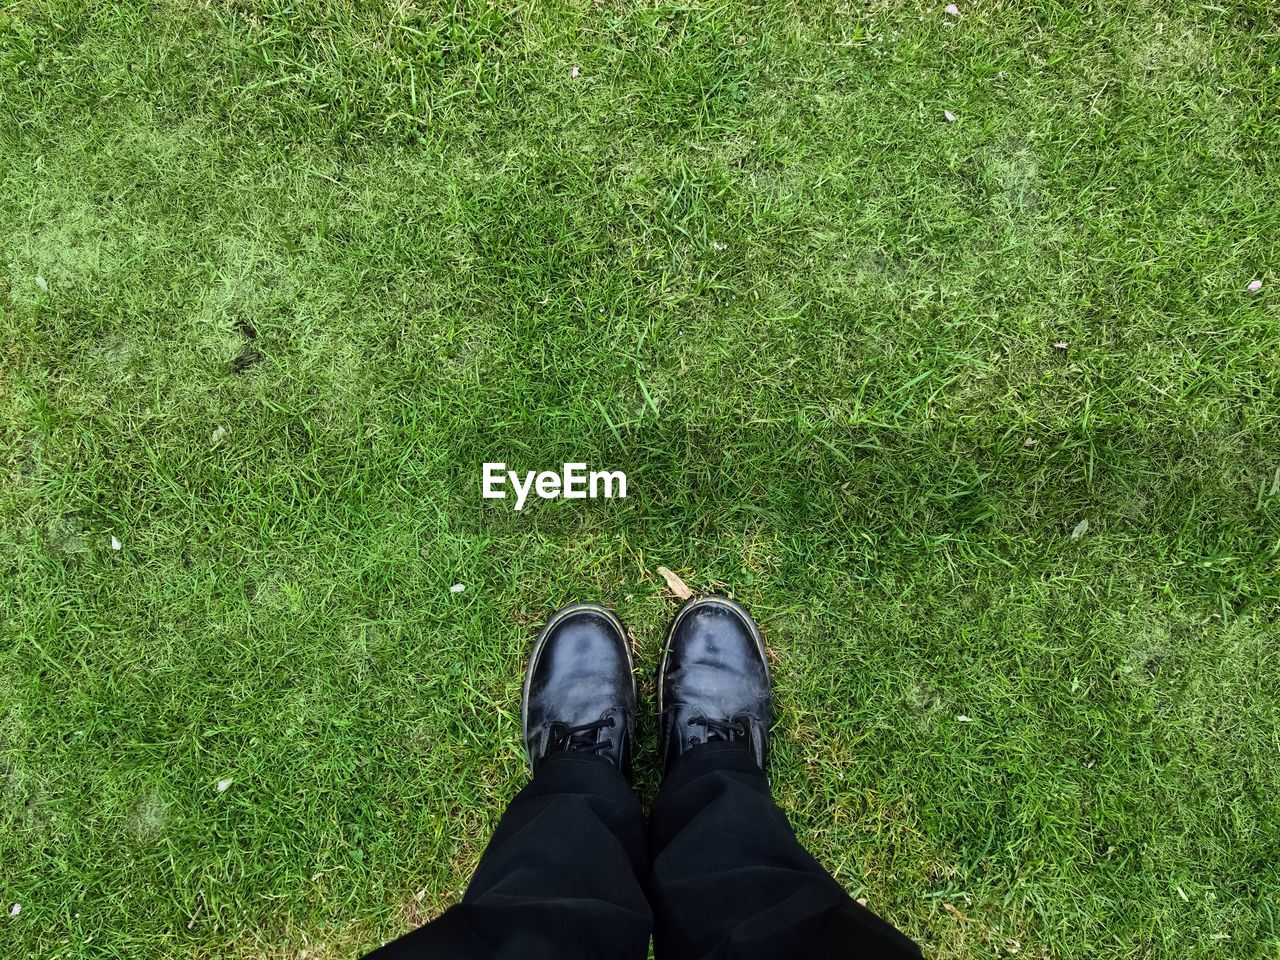 Two black shoes and legs on a grass surface - top view concept